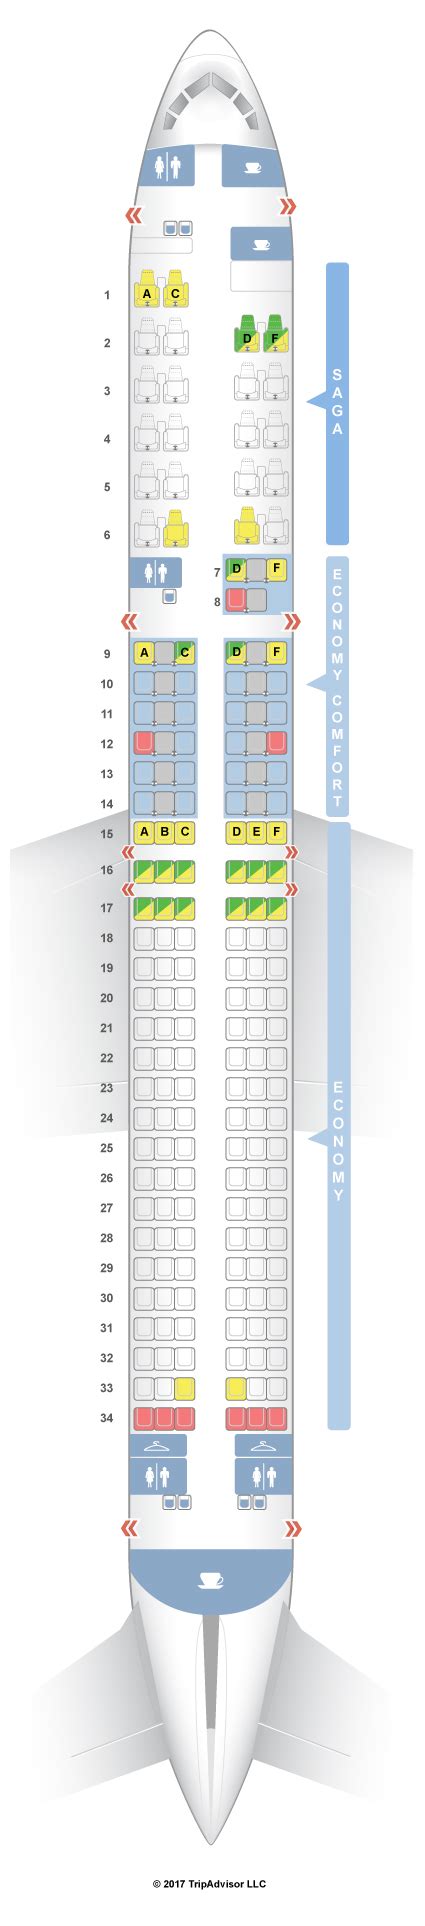 The Air Canada Boeing 787-9 seat map shows 298 seats configured as: 30 Business, 21 Premium Economy, 247 Economy. Air Canada's business class on the advanced Boeing 787-9 series, is a testament to modern luxury. Designed for 30 discerning travelers, it boasts state-of-the-art amenities, opulent seating, and a top-tier entertainment system.